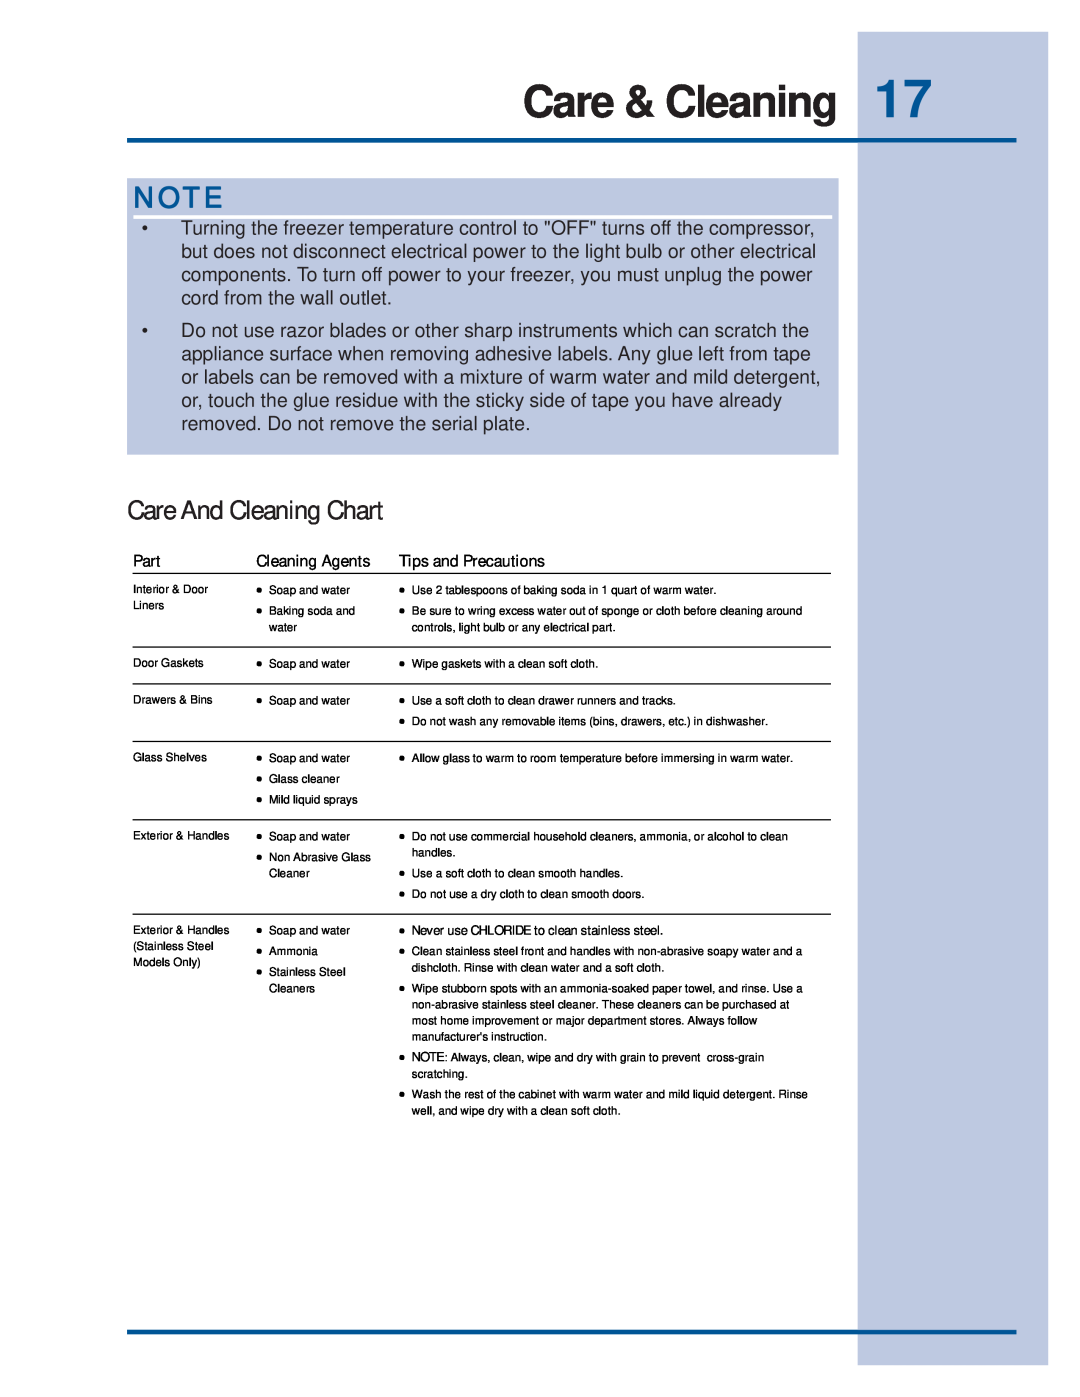 Electrolux 297122900 (0608) manual Care & Cleaning, Care And Cleaning Chart 